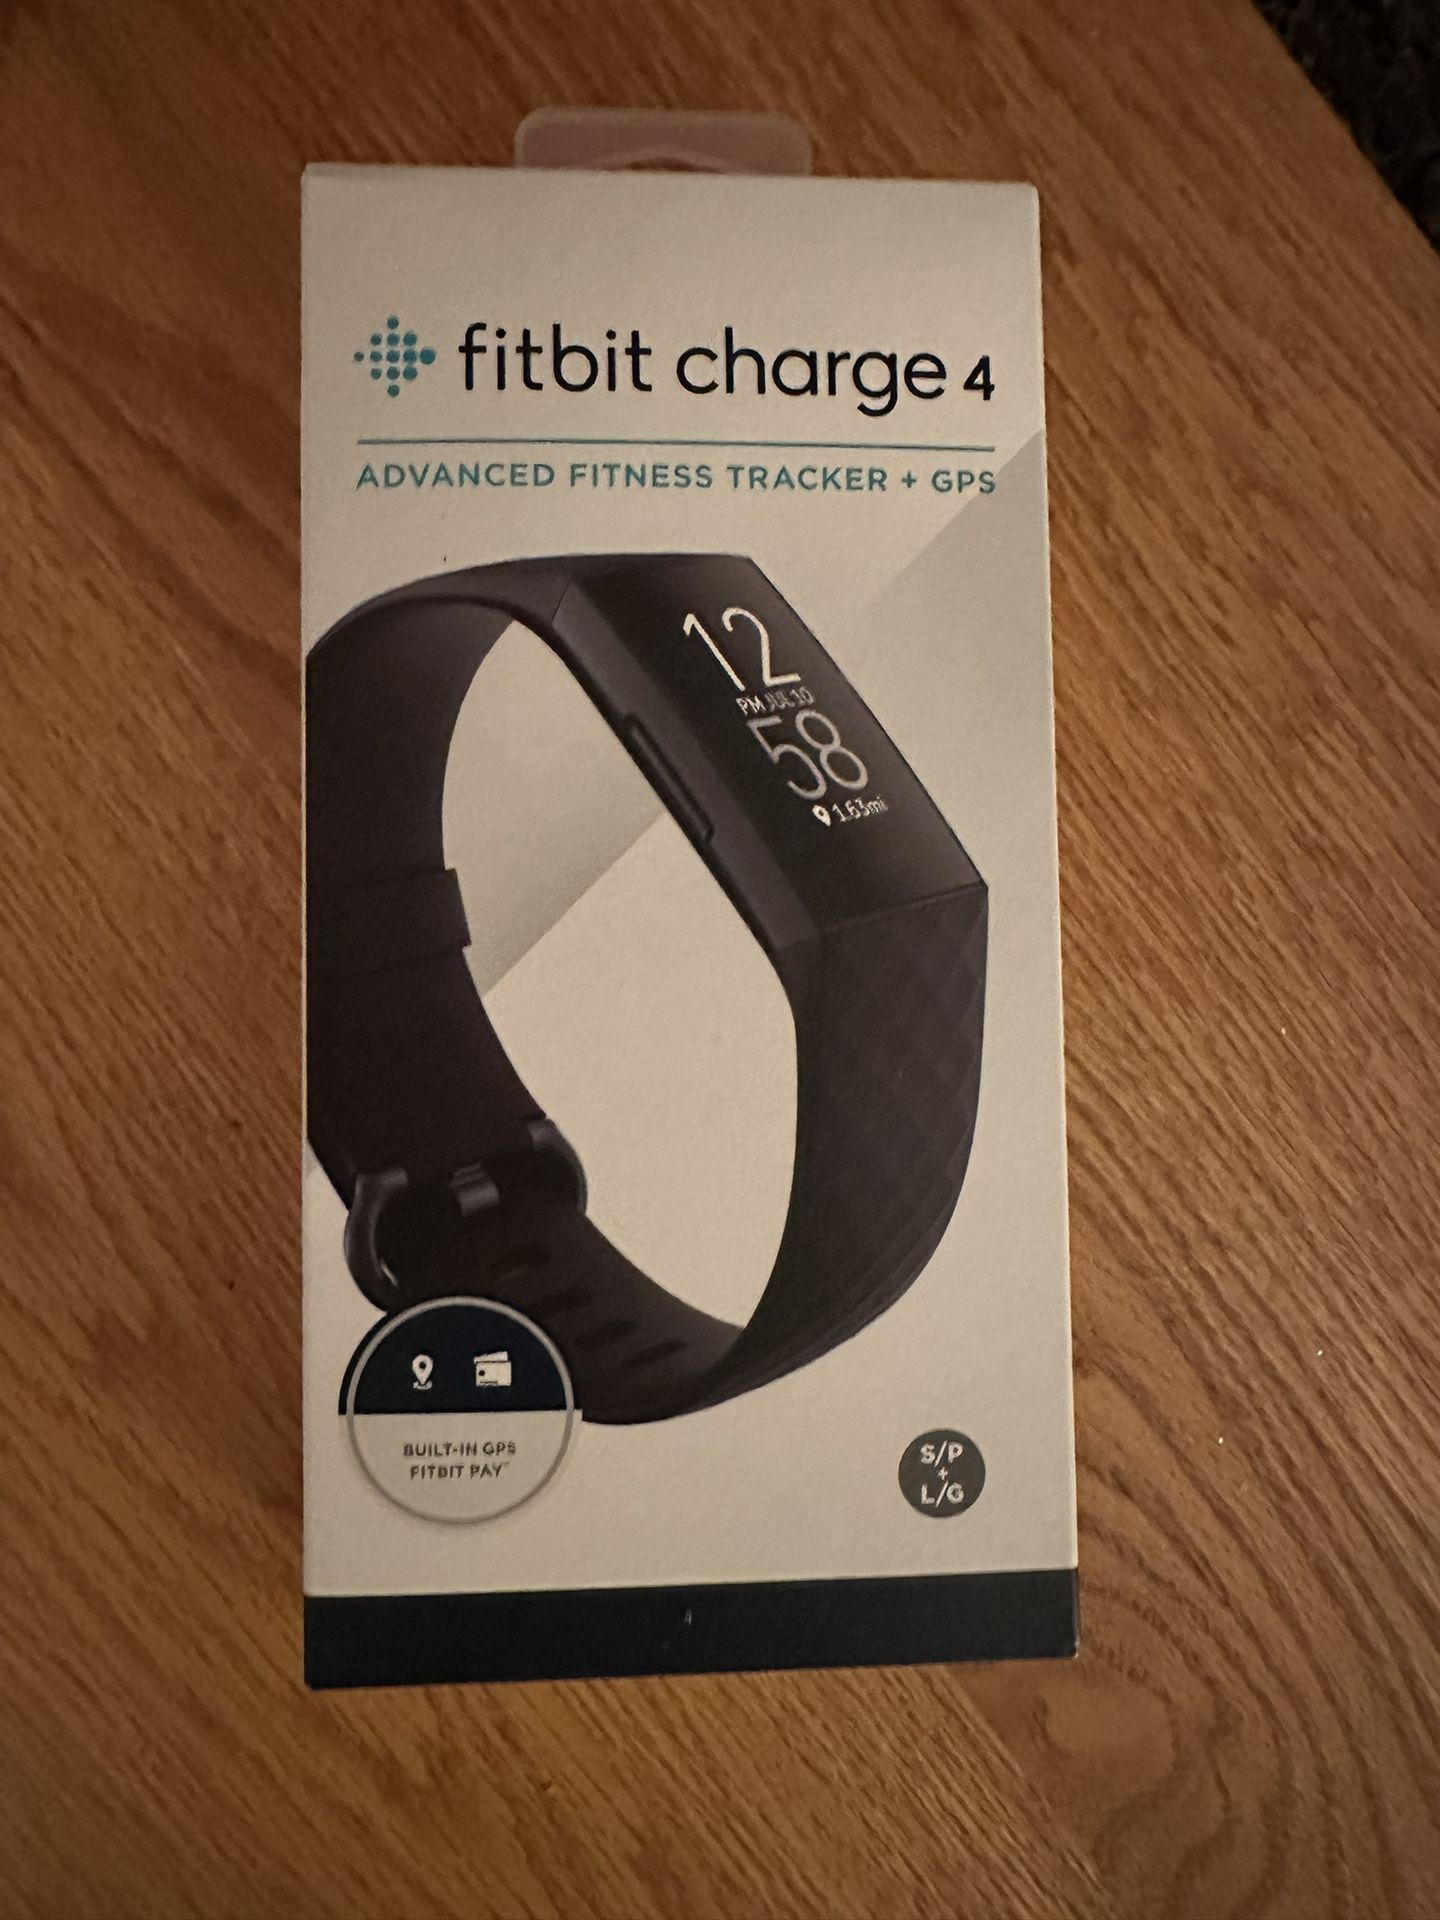 Fitbit Charge 4 Brand New-Never Used Or Opened